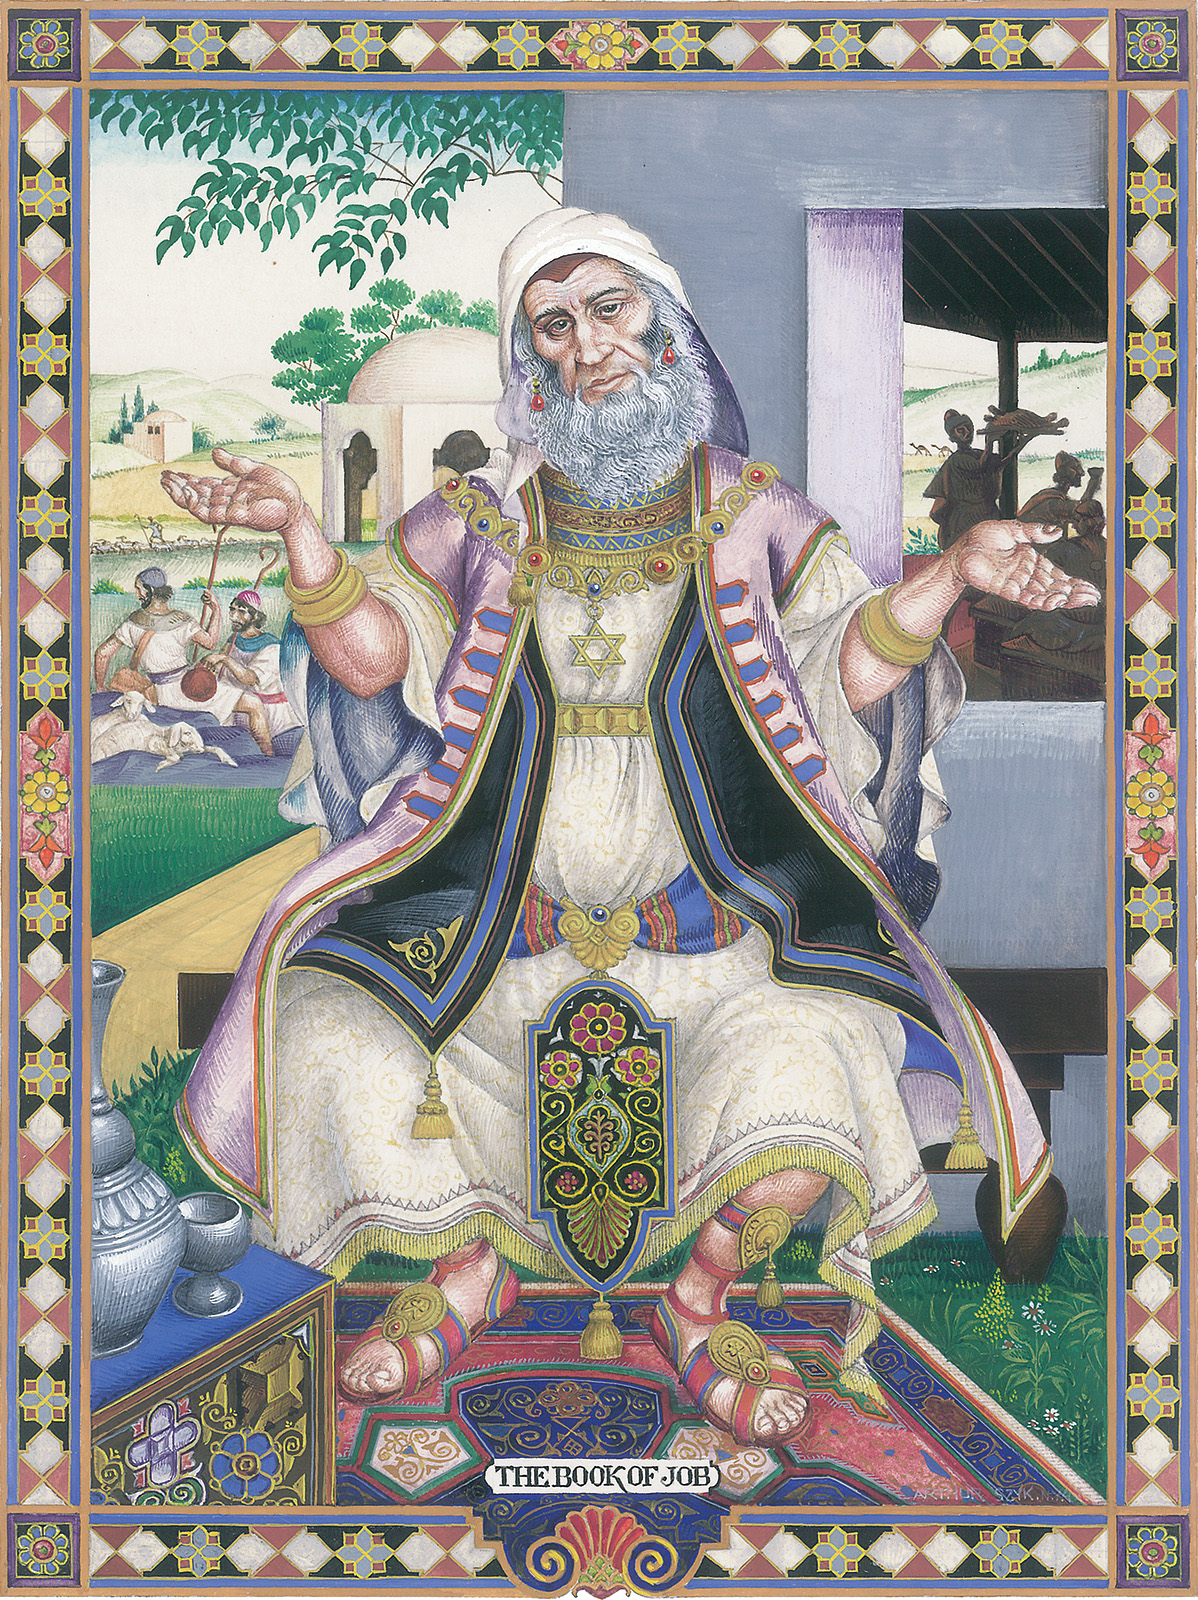 <p>Arthur Szyk.</p>
<p>The Book of Job.</p>
<p>Complete suite of eight original gouache and ink illustrations.</p>
<p>New York, 1943-45.</p>
<p>Sold at auction 16th December, 2015.</p>
<p>Hammer-price: $110,000.</p>